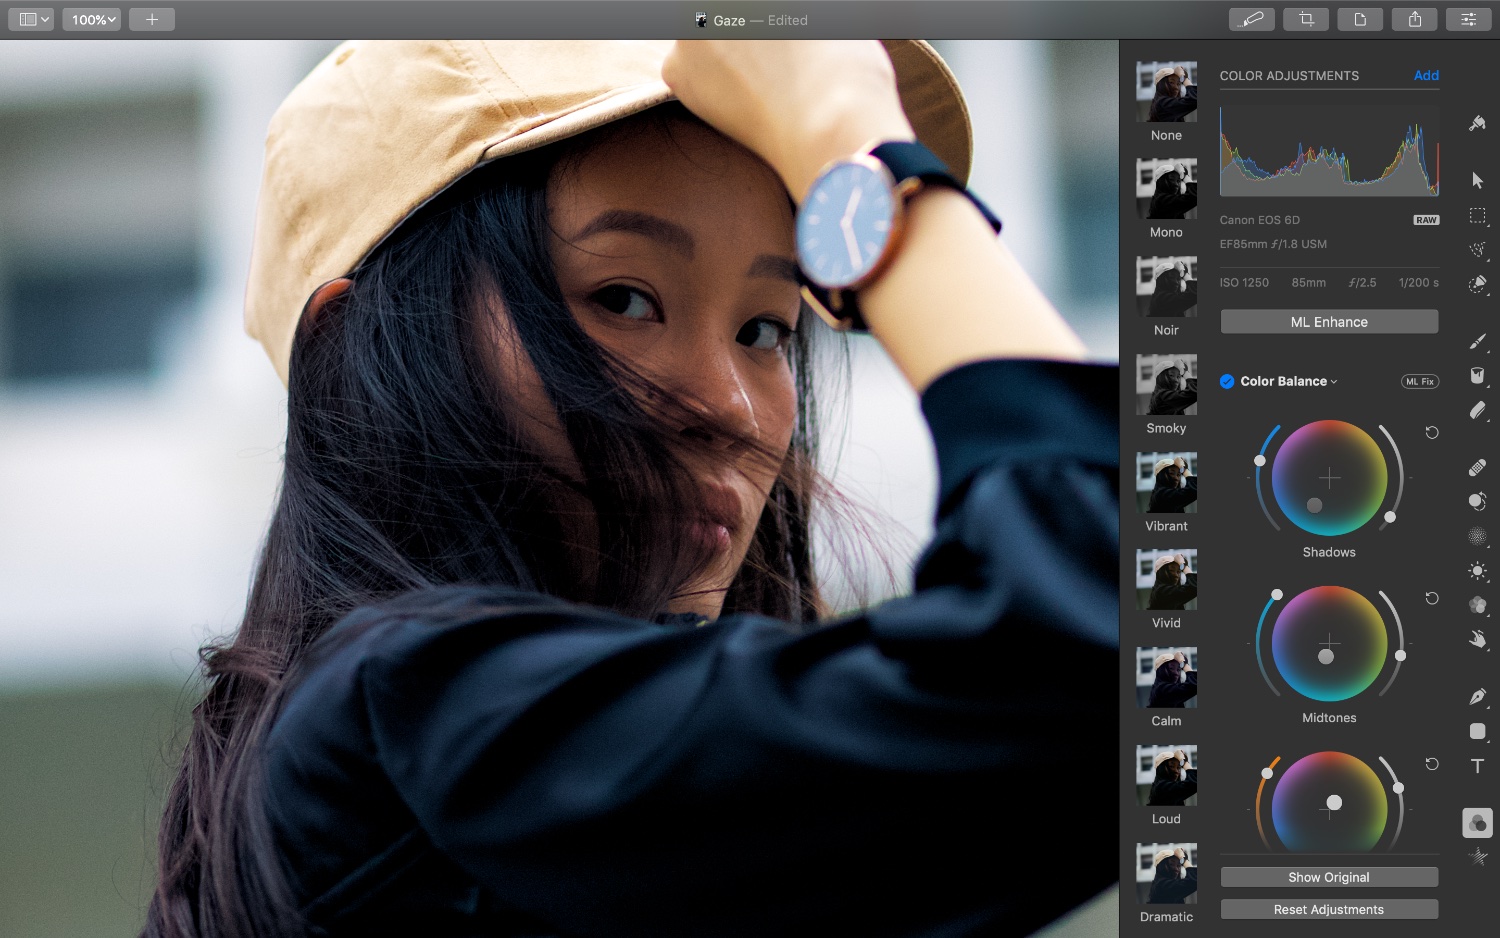 Pixelmator Pro 1.2.4 adds redesigned Color Balance adjustment tool, more